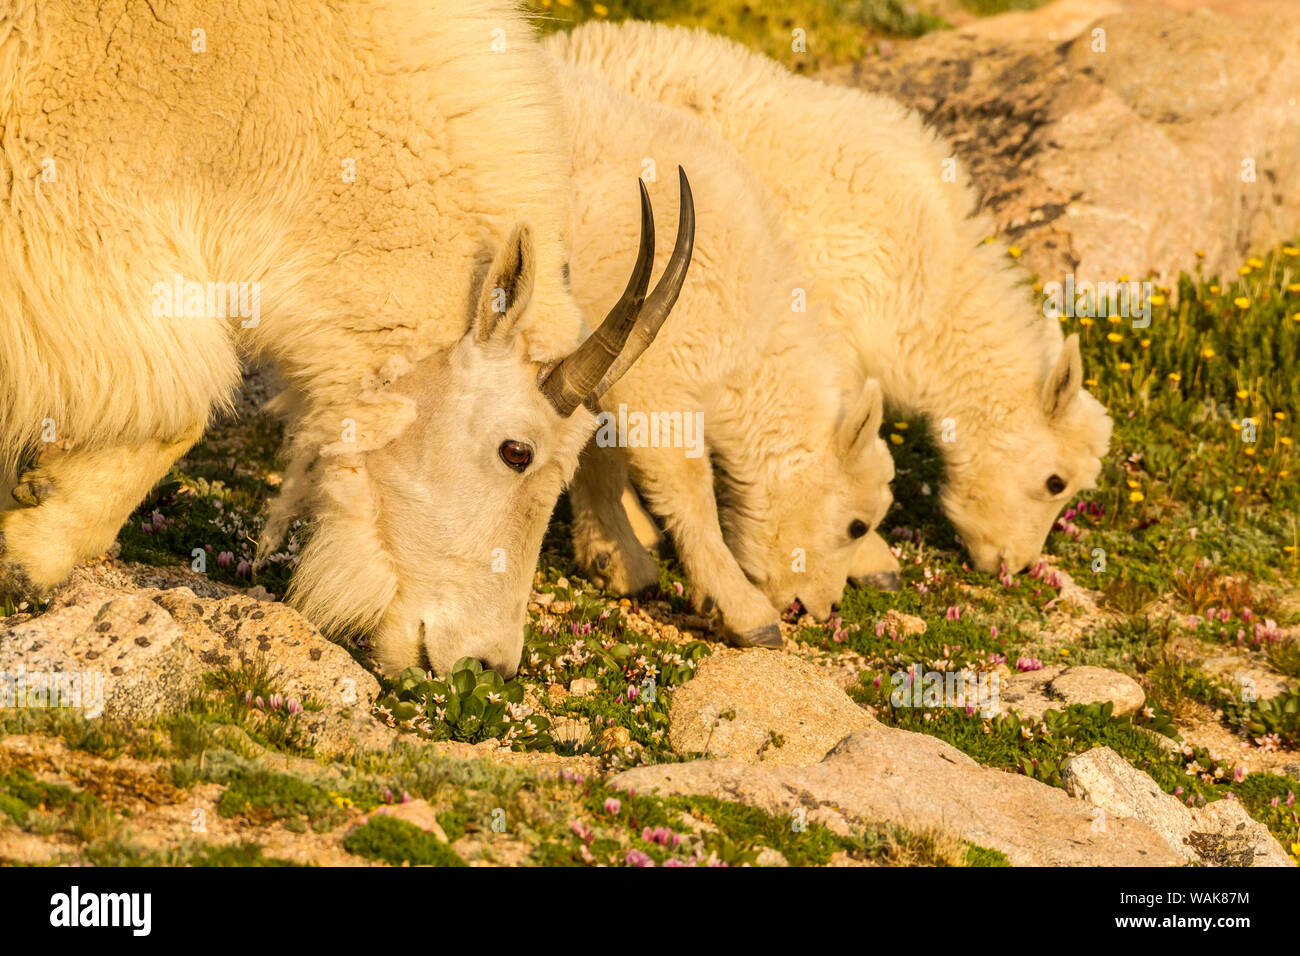 USA, Colorado, Mt. Evans. Mountain goat nanny and kids eating. Credit as: Cathy and Gordon Illg / Jaynes Gallery / DanitaDelimont.com Stock Photo